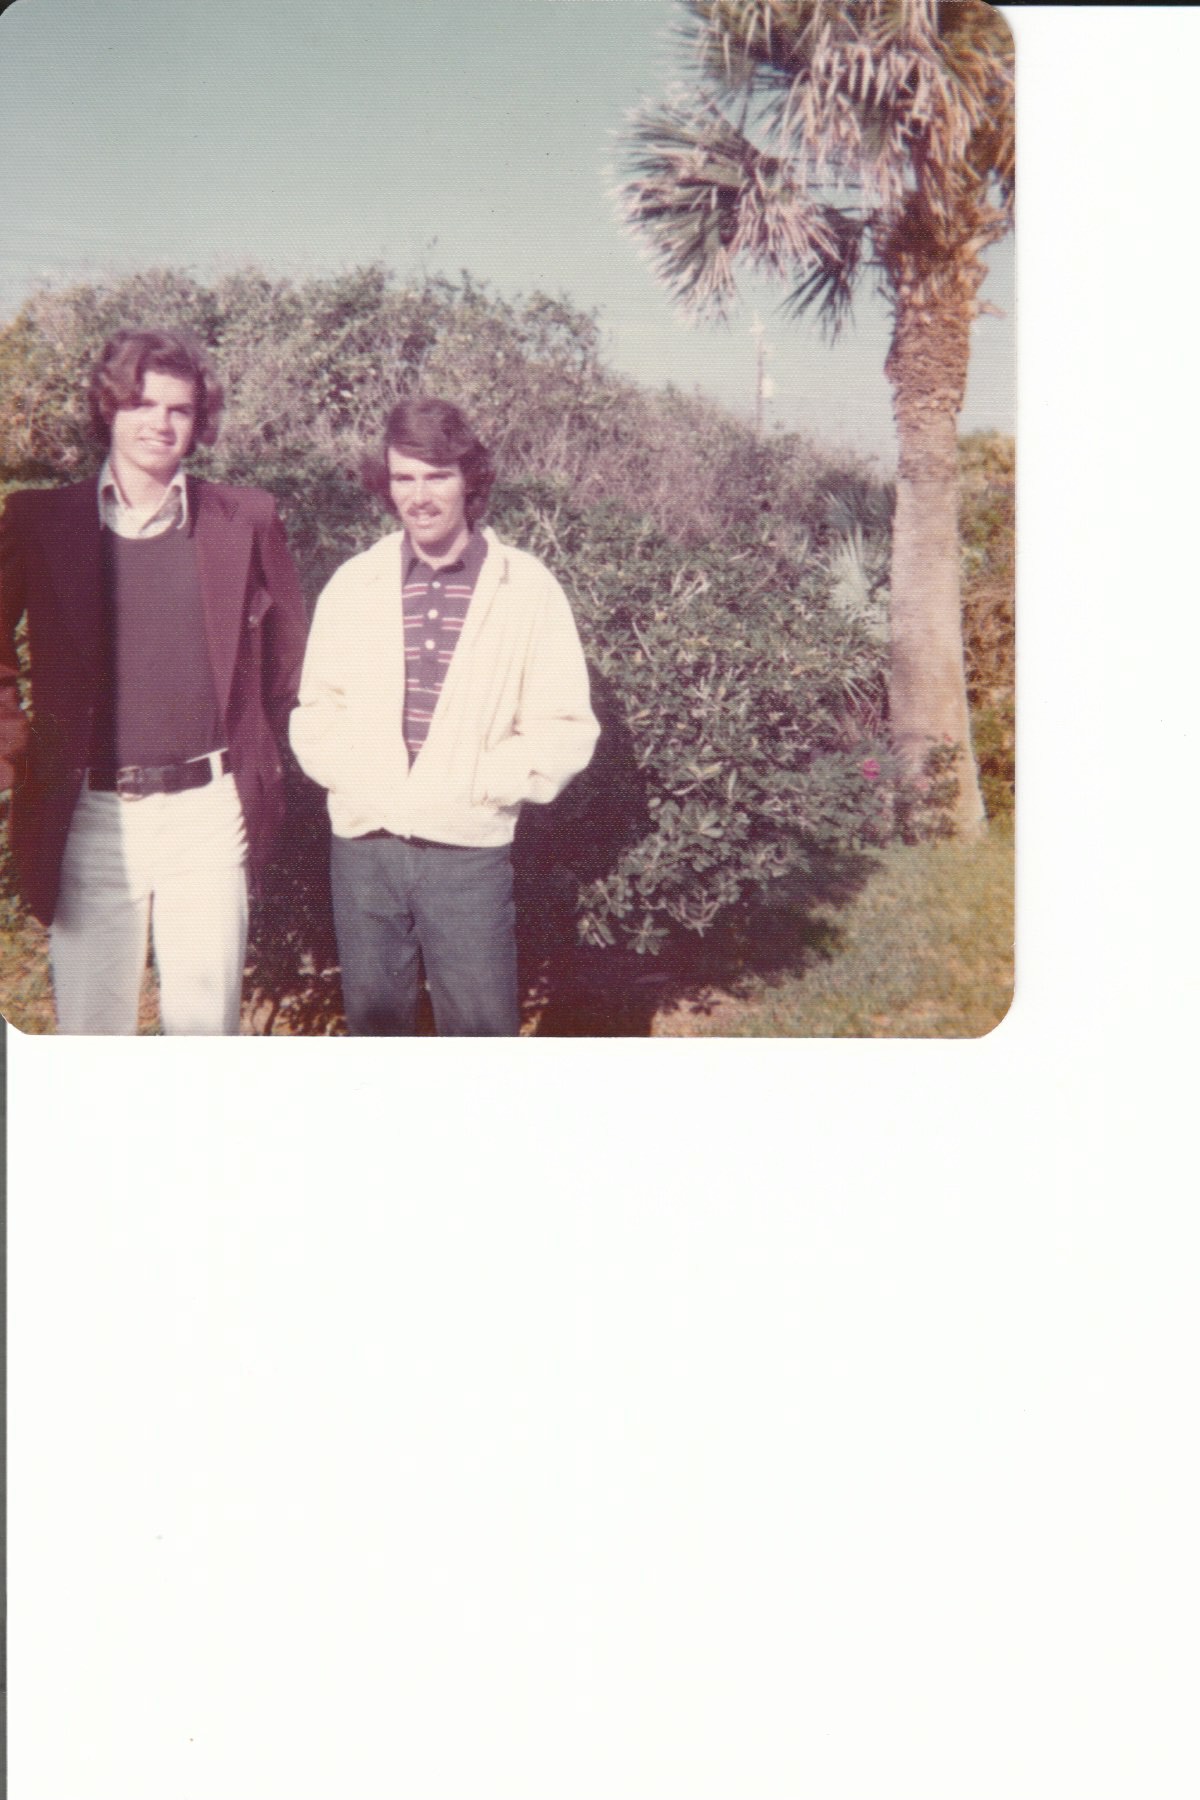 Scott and I when I visited him in Ormond Beach in February 1974,  we were both 17 years old.